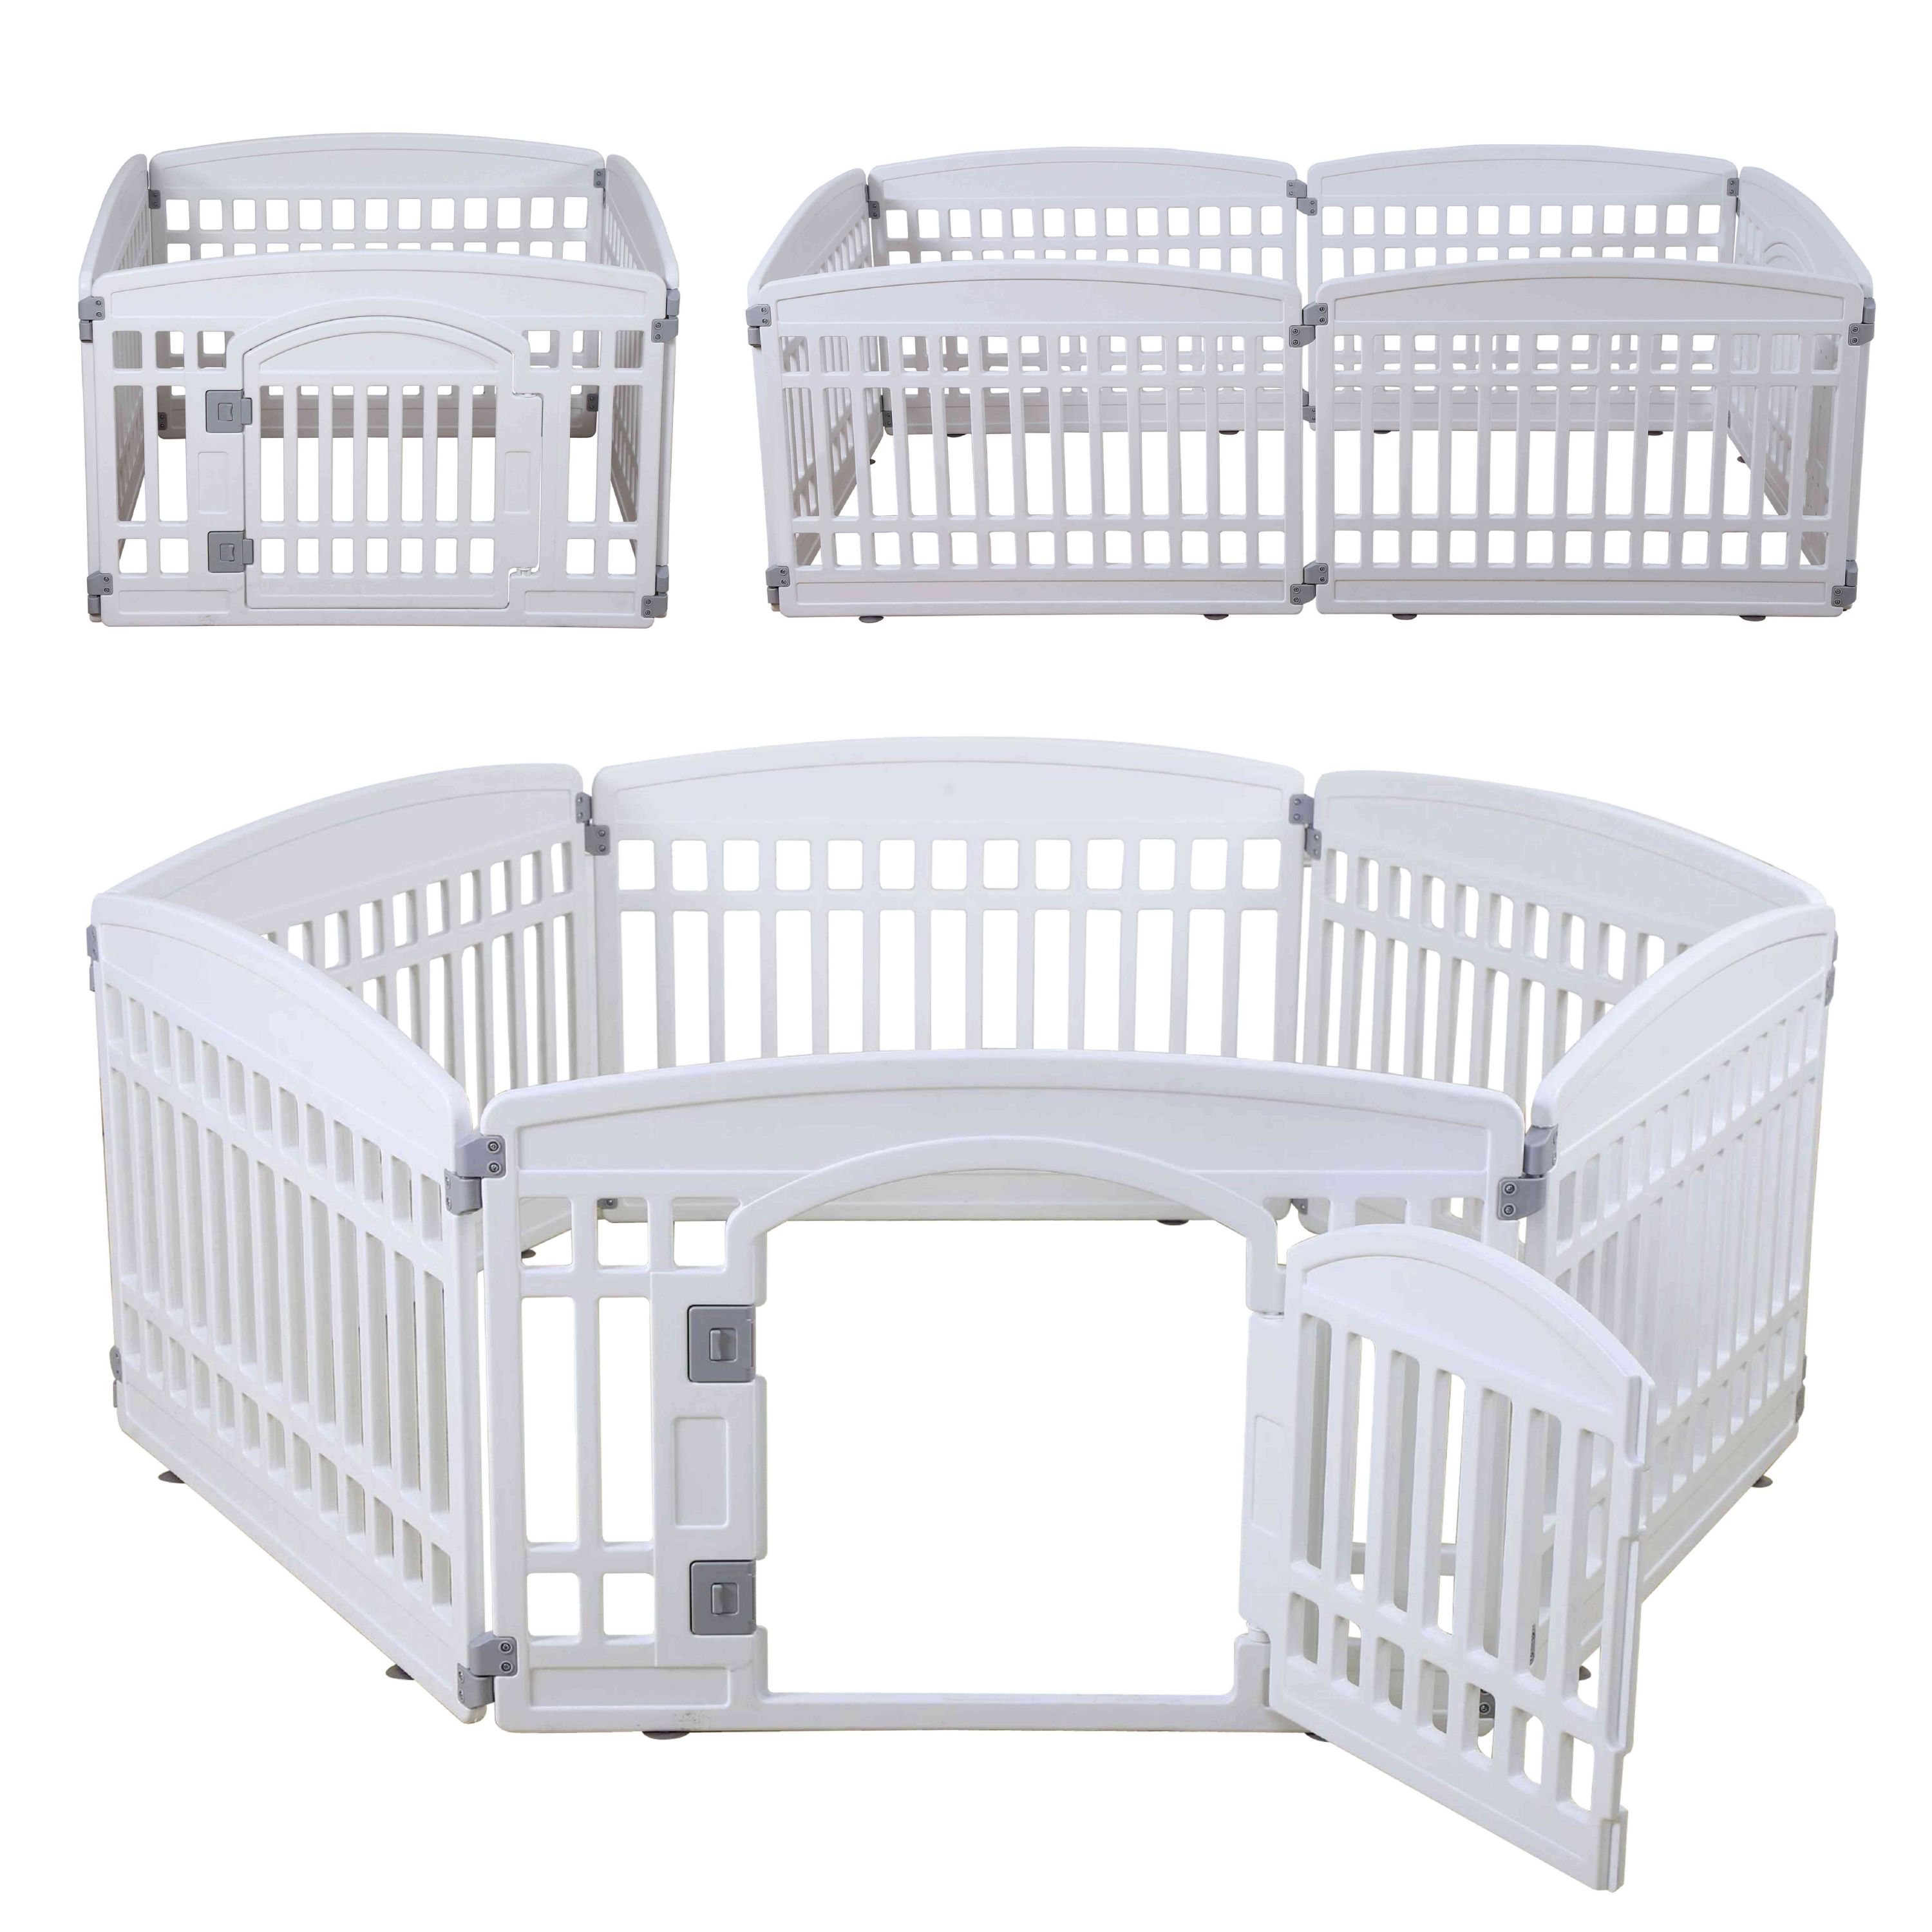 Pet Playpen Foldable Gate for Dogs Heavy Plastic Puppy Exercise Pen with Door Portable Indoor Outdoor Small Pets Fence Puppies Folding Cage 6 Panels Medium Animals House Supplies (White 6*Panel)